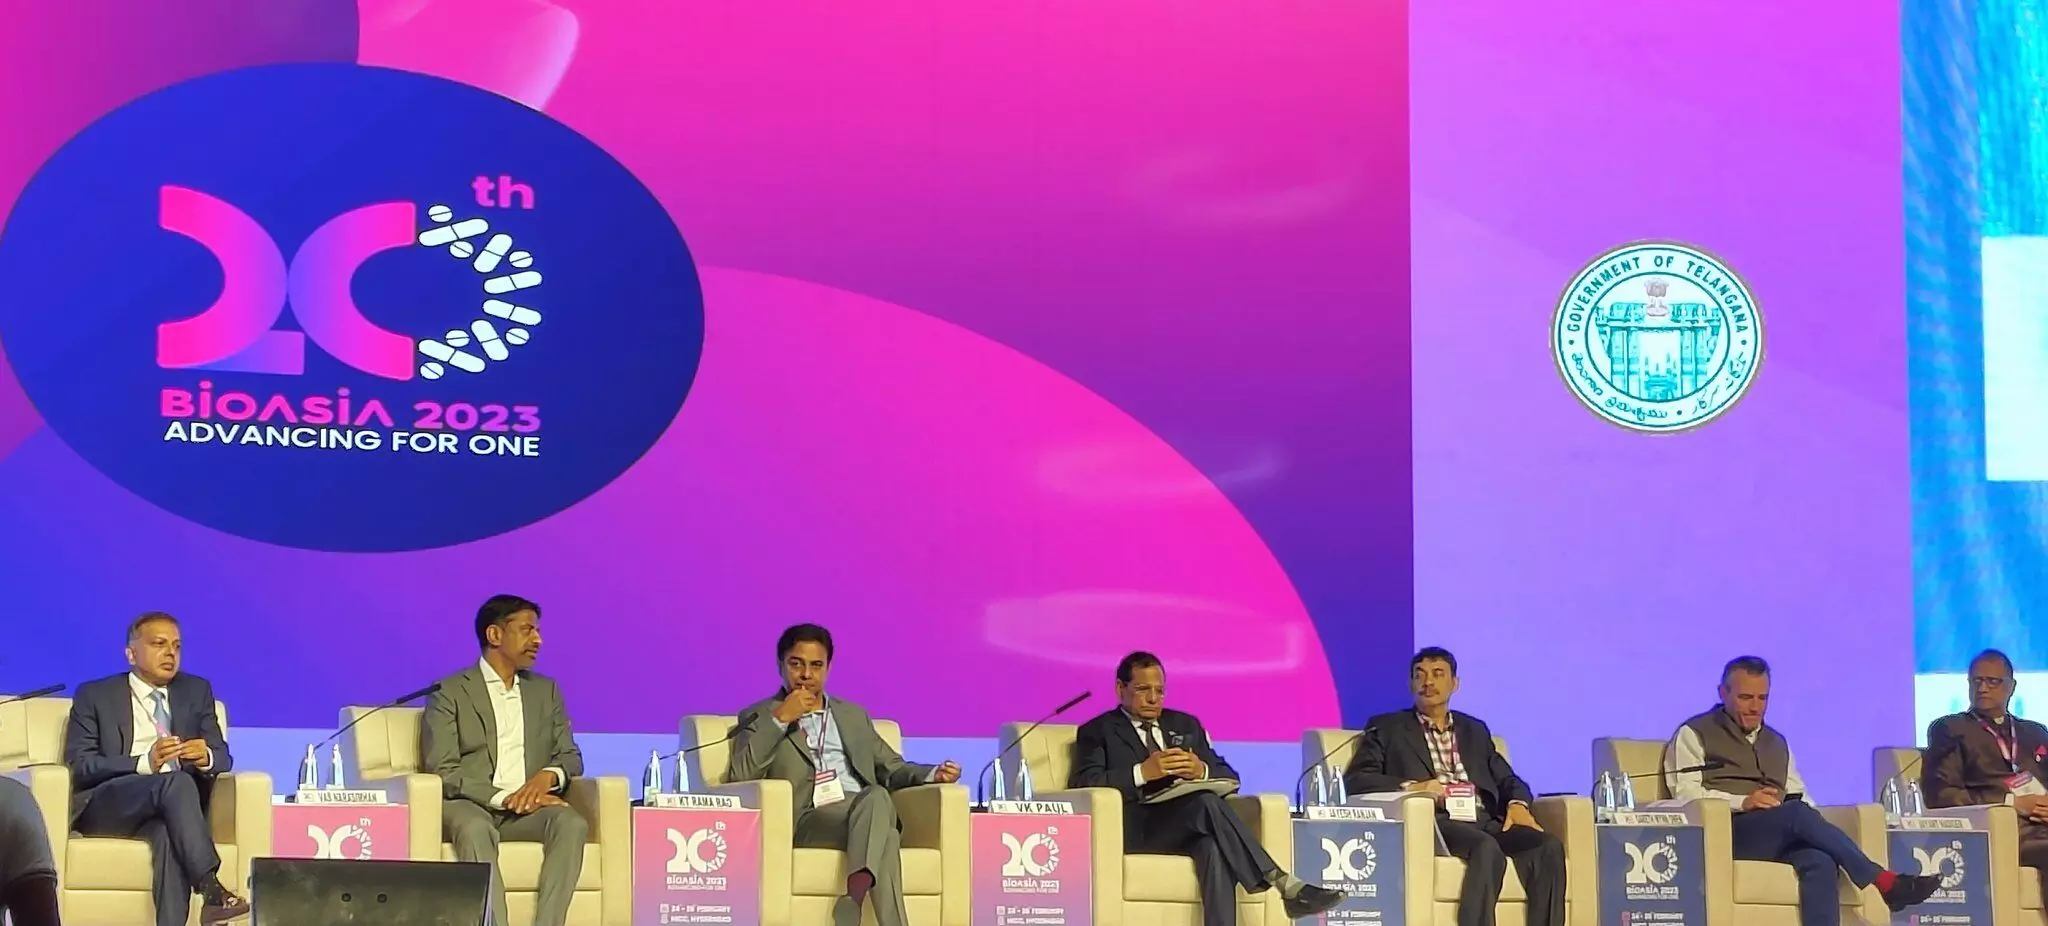 BioAsia 2023 Live Updates: KTR Inaugurated the 20th edition of BioAsia 2023 in Hyderabad